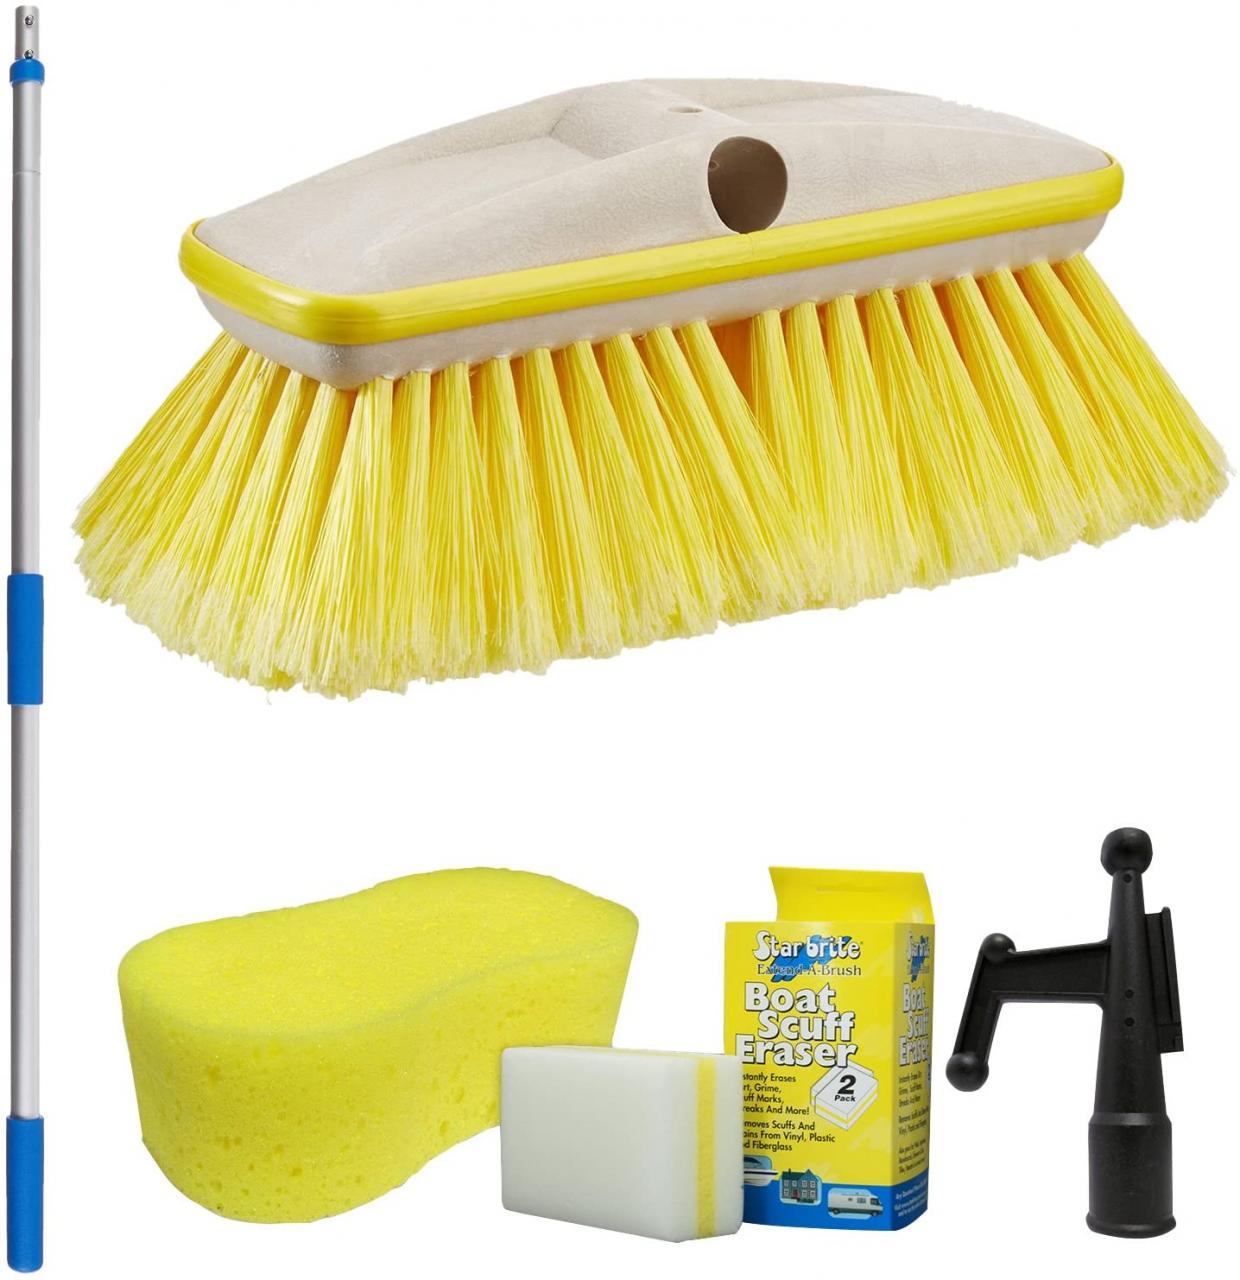 Buy Star brite 36' Standard Extending Handle With 8 Deluxe Brush Combo  Online in Indonesia. B00EVIP8O0